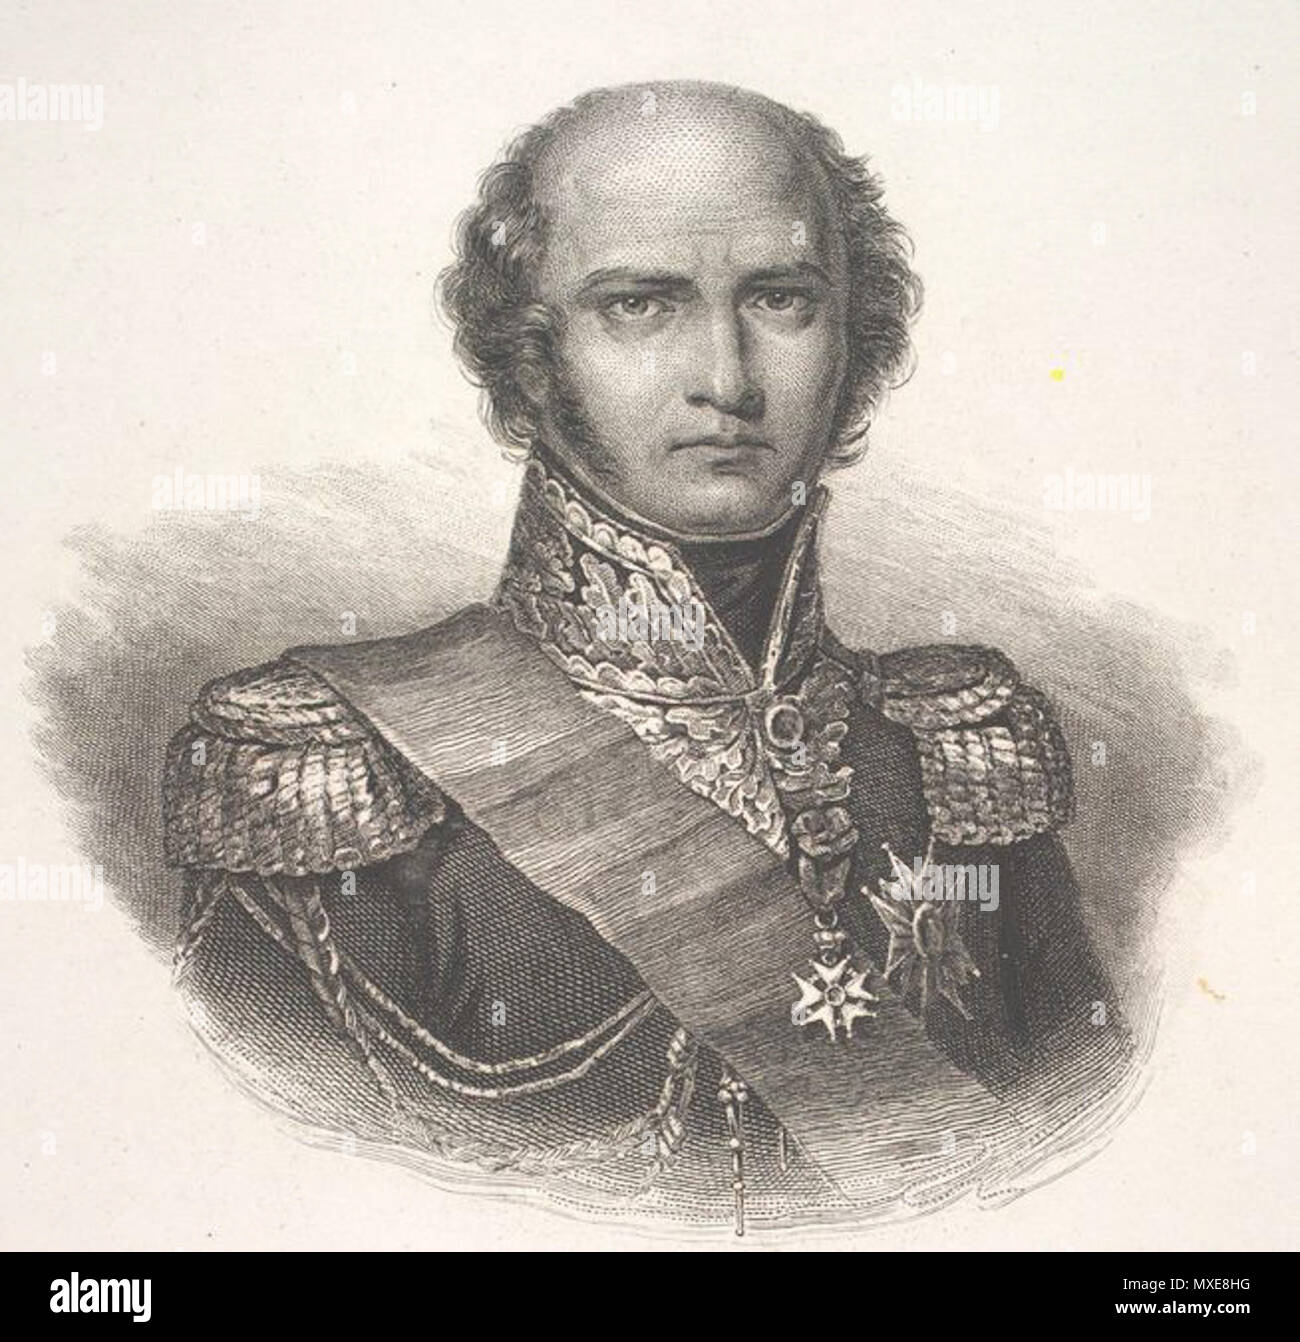 Louis-Nicolas Davout, Marshal of the Empire (1770-1823) Stock Illustration